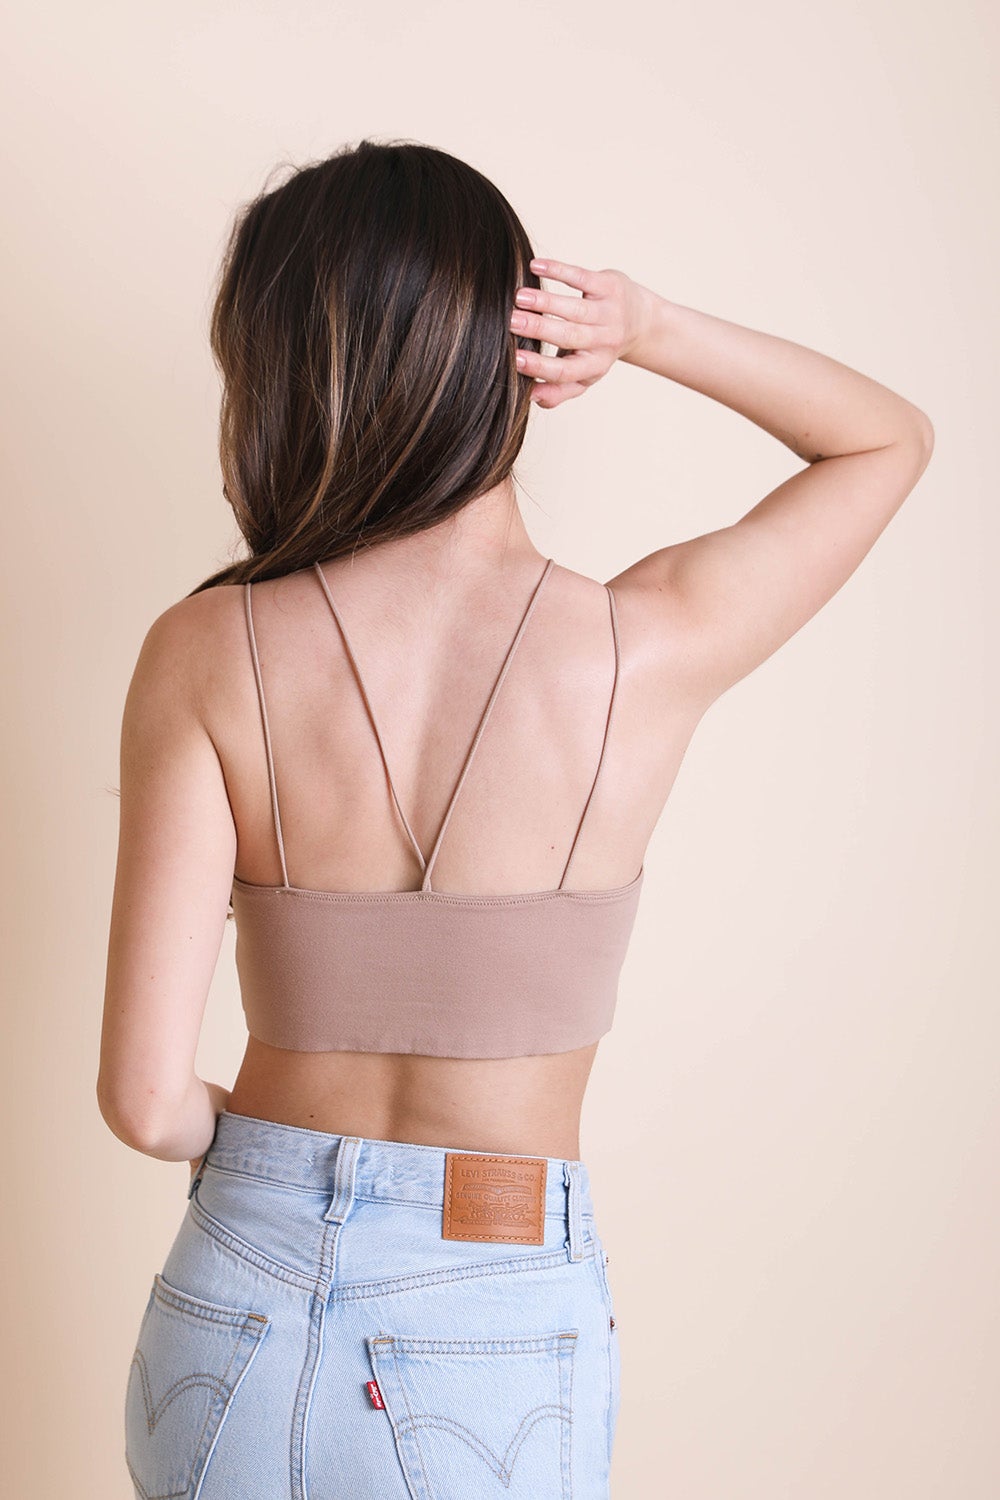 Sexy Y-Neck Plunge Crop Top - Roses & Chains | Fashionable Clothing, Shoes, Accessories, & More